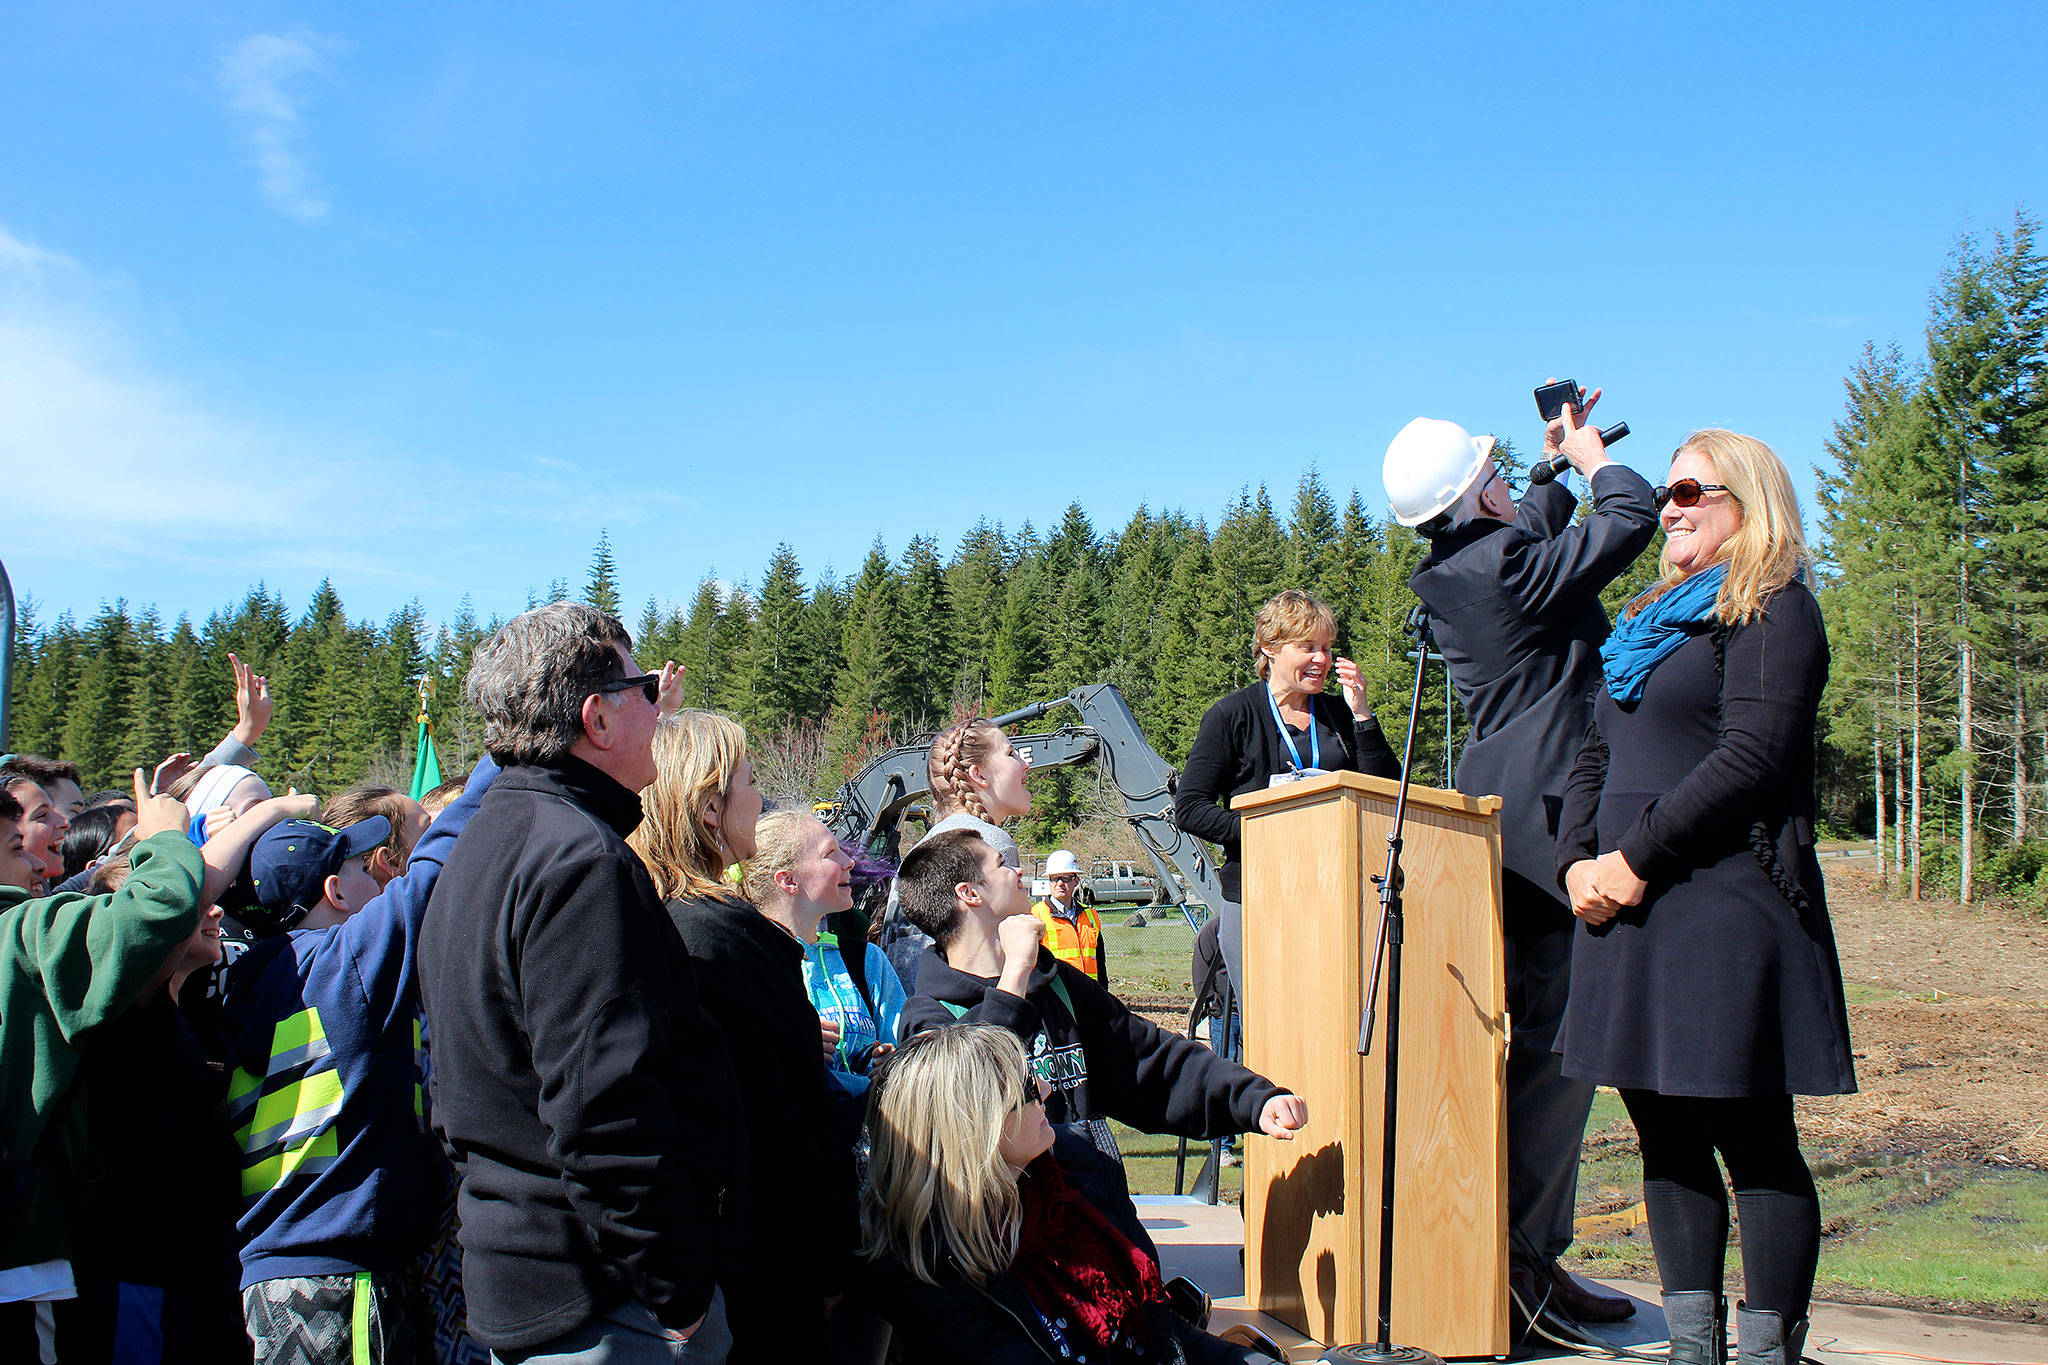 Central Kitsap School District Superintendent David McVicker takes a “selfie” photo with the Klahowya staff and students at the end of the groundbreaking ceremony April 14.                                Michelle Beahm / Kitsap News Group